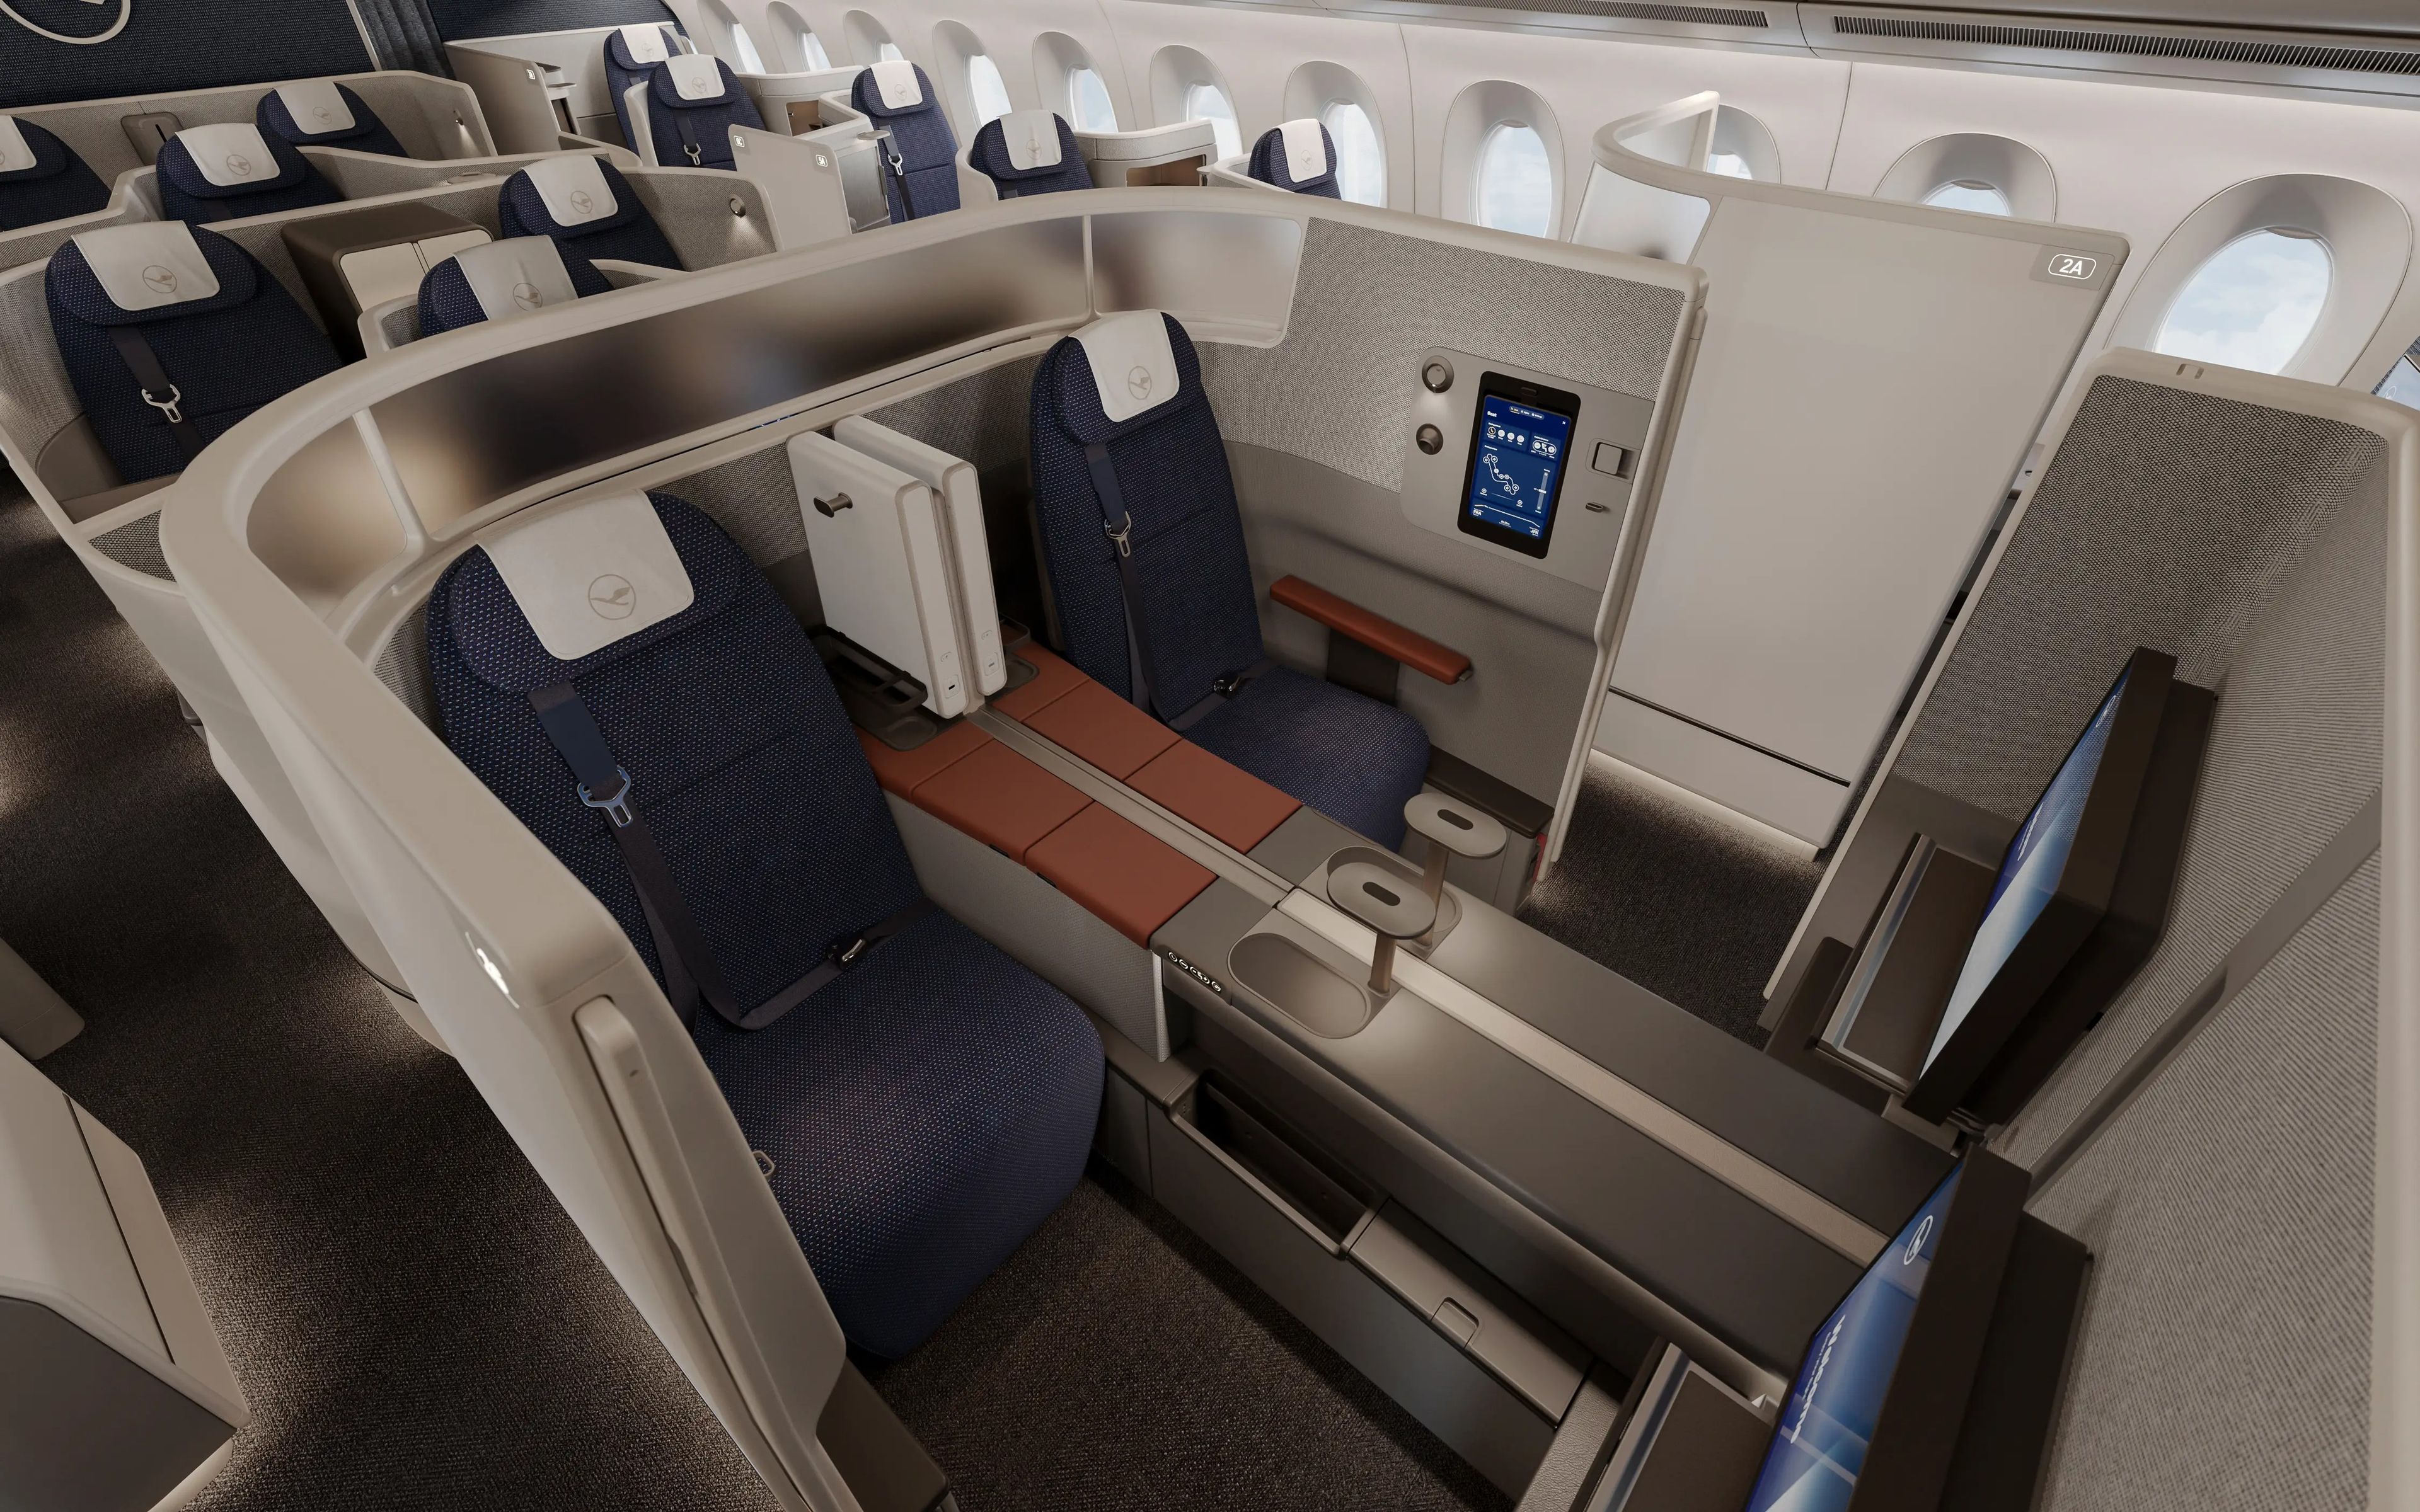 A double suite in Lufthansa's new business-class cabin.